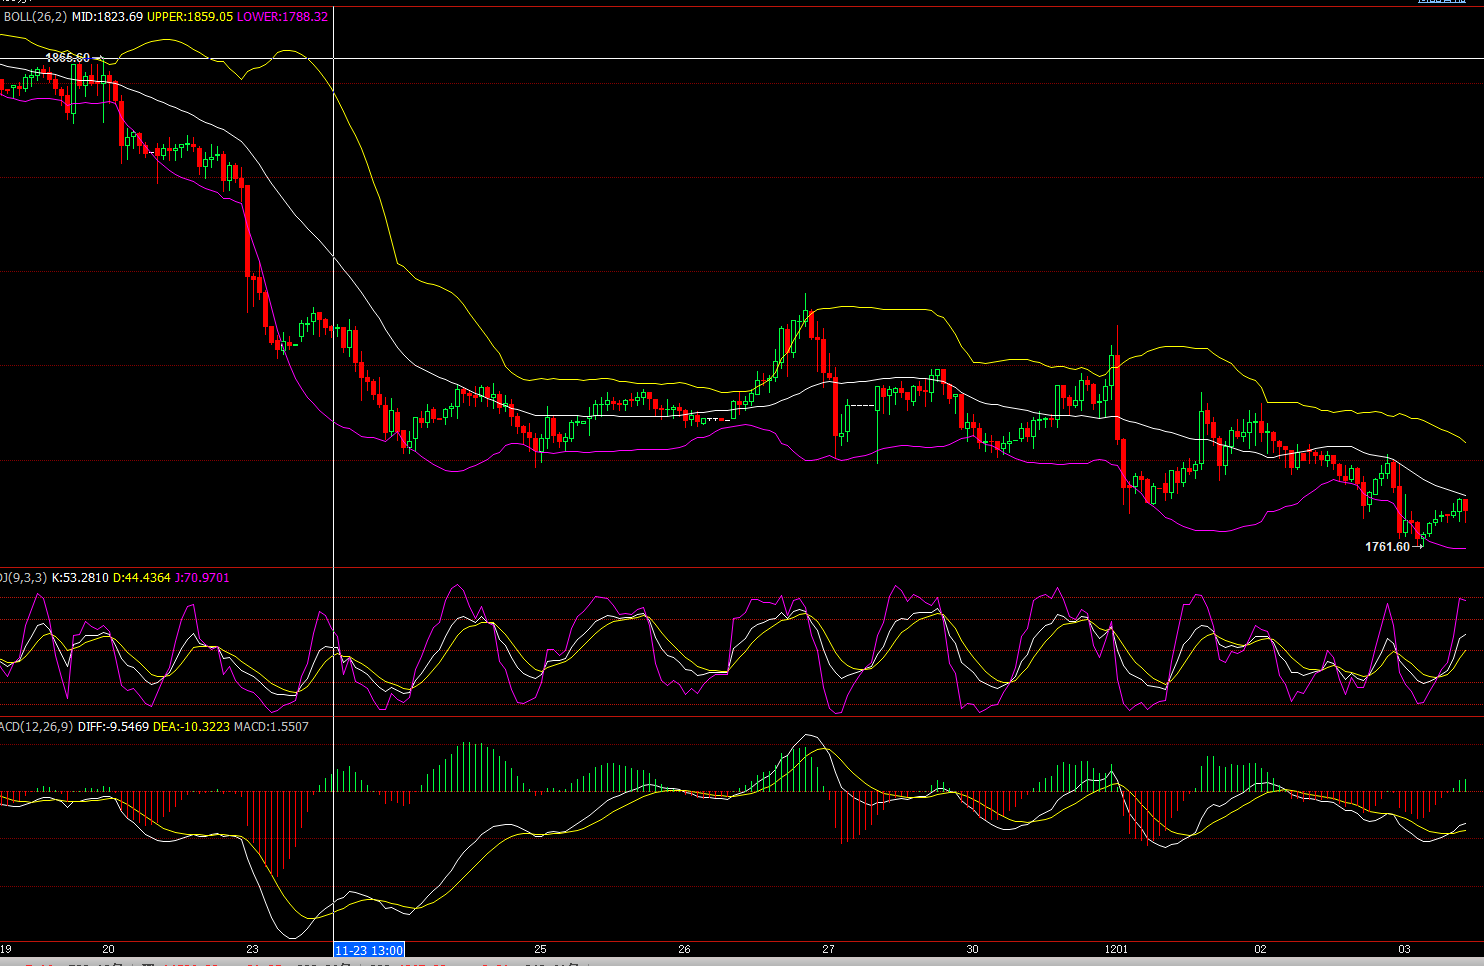 Selling at high. the upper resistance level is 1780 USD  per ounce,the below support level is 1760 USD per ounce.